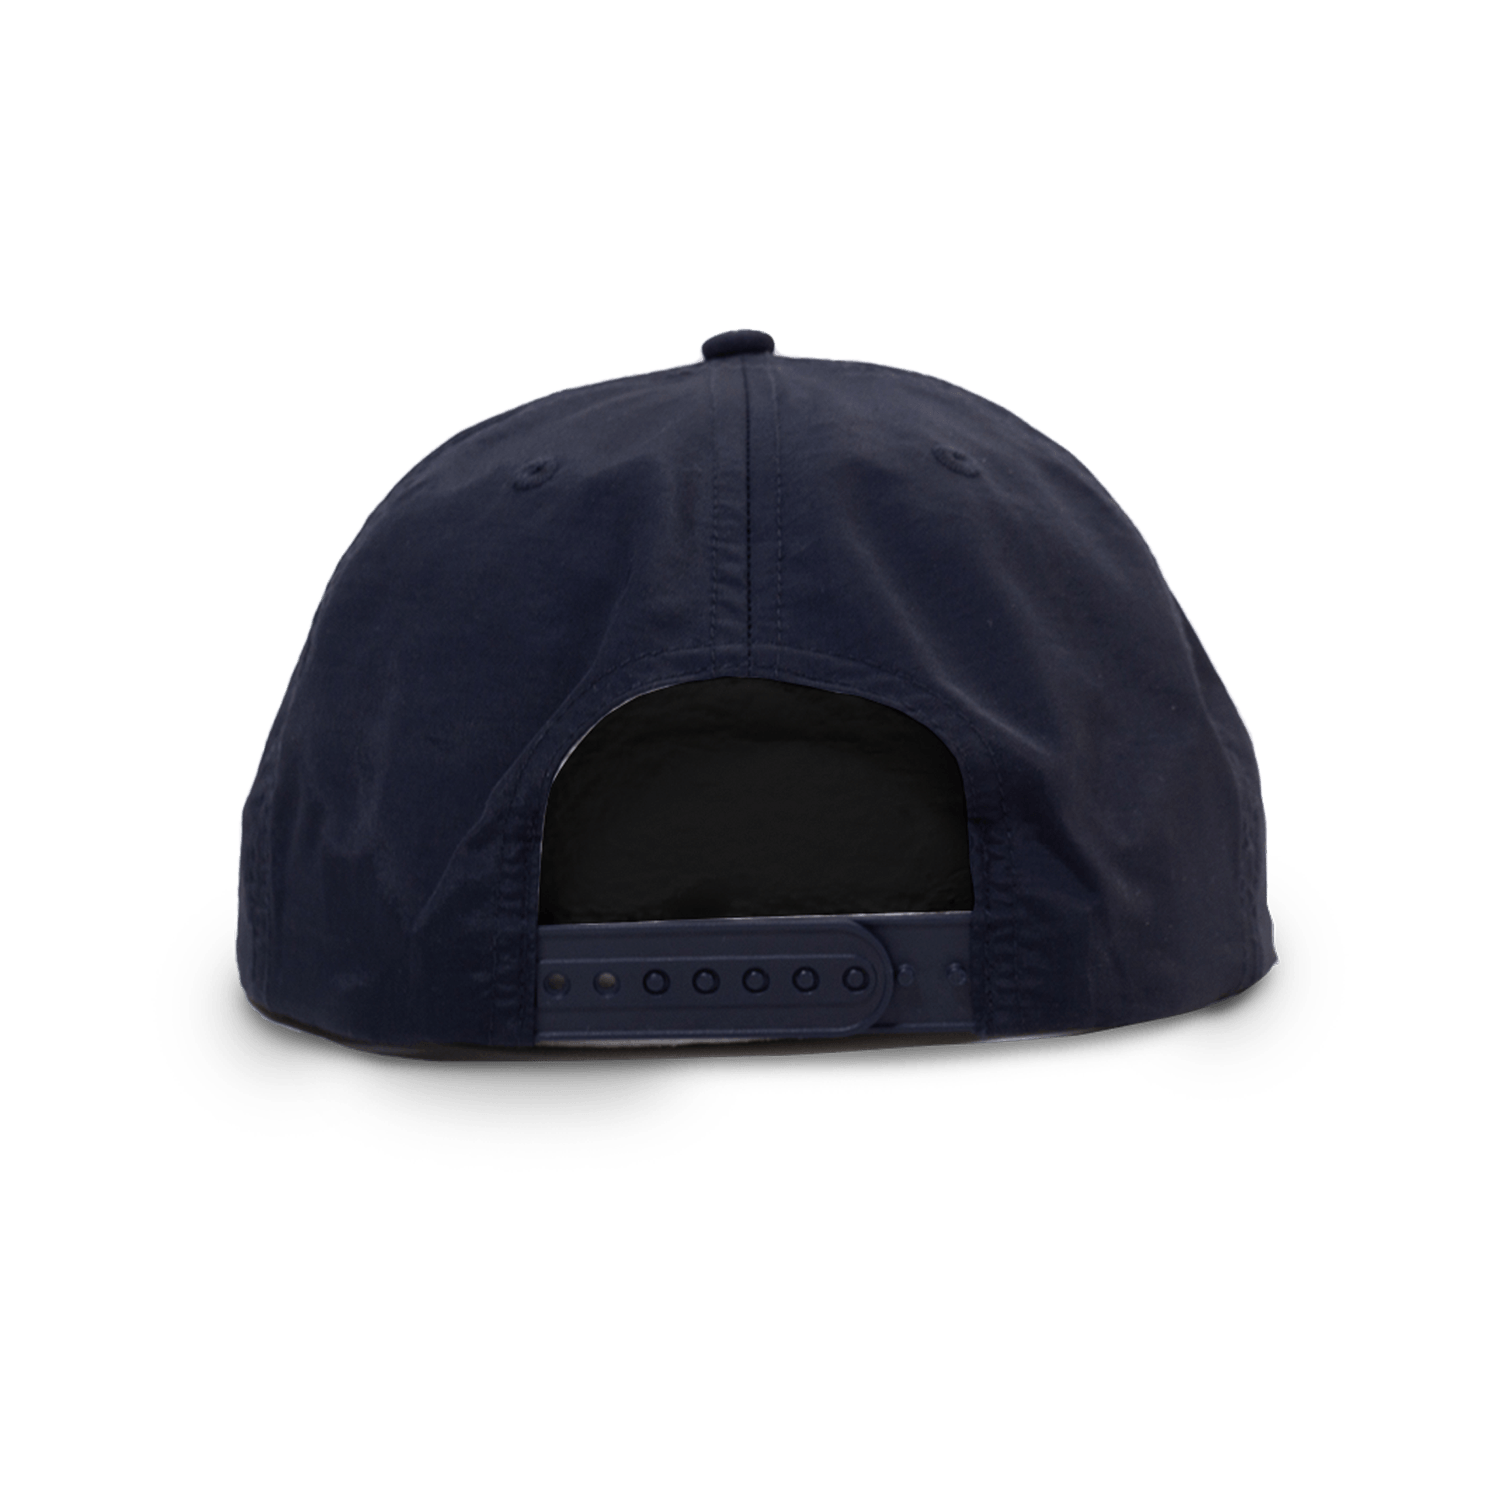 Back view of Navy blue hat with snap adjustable strap.